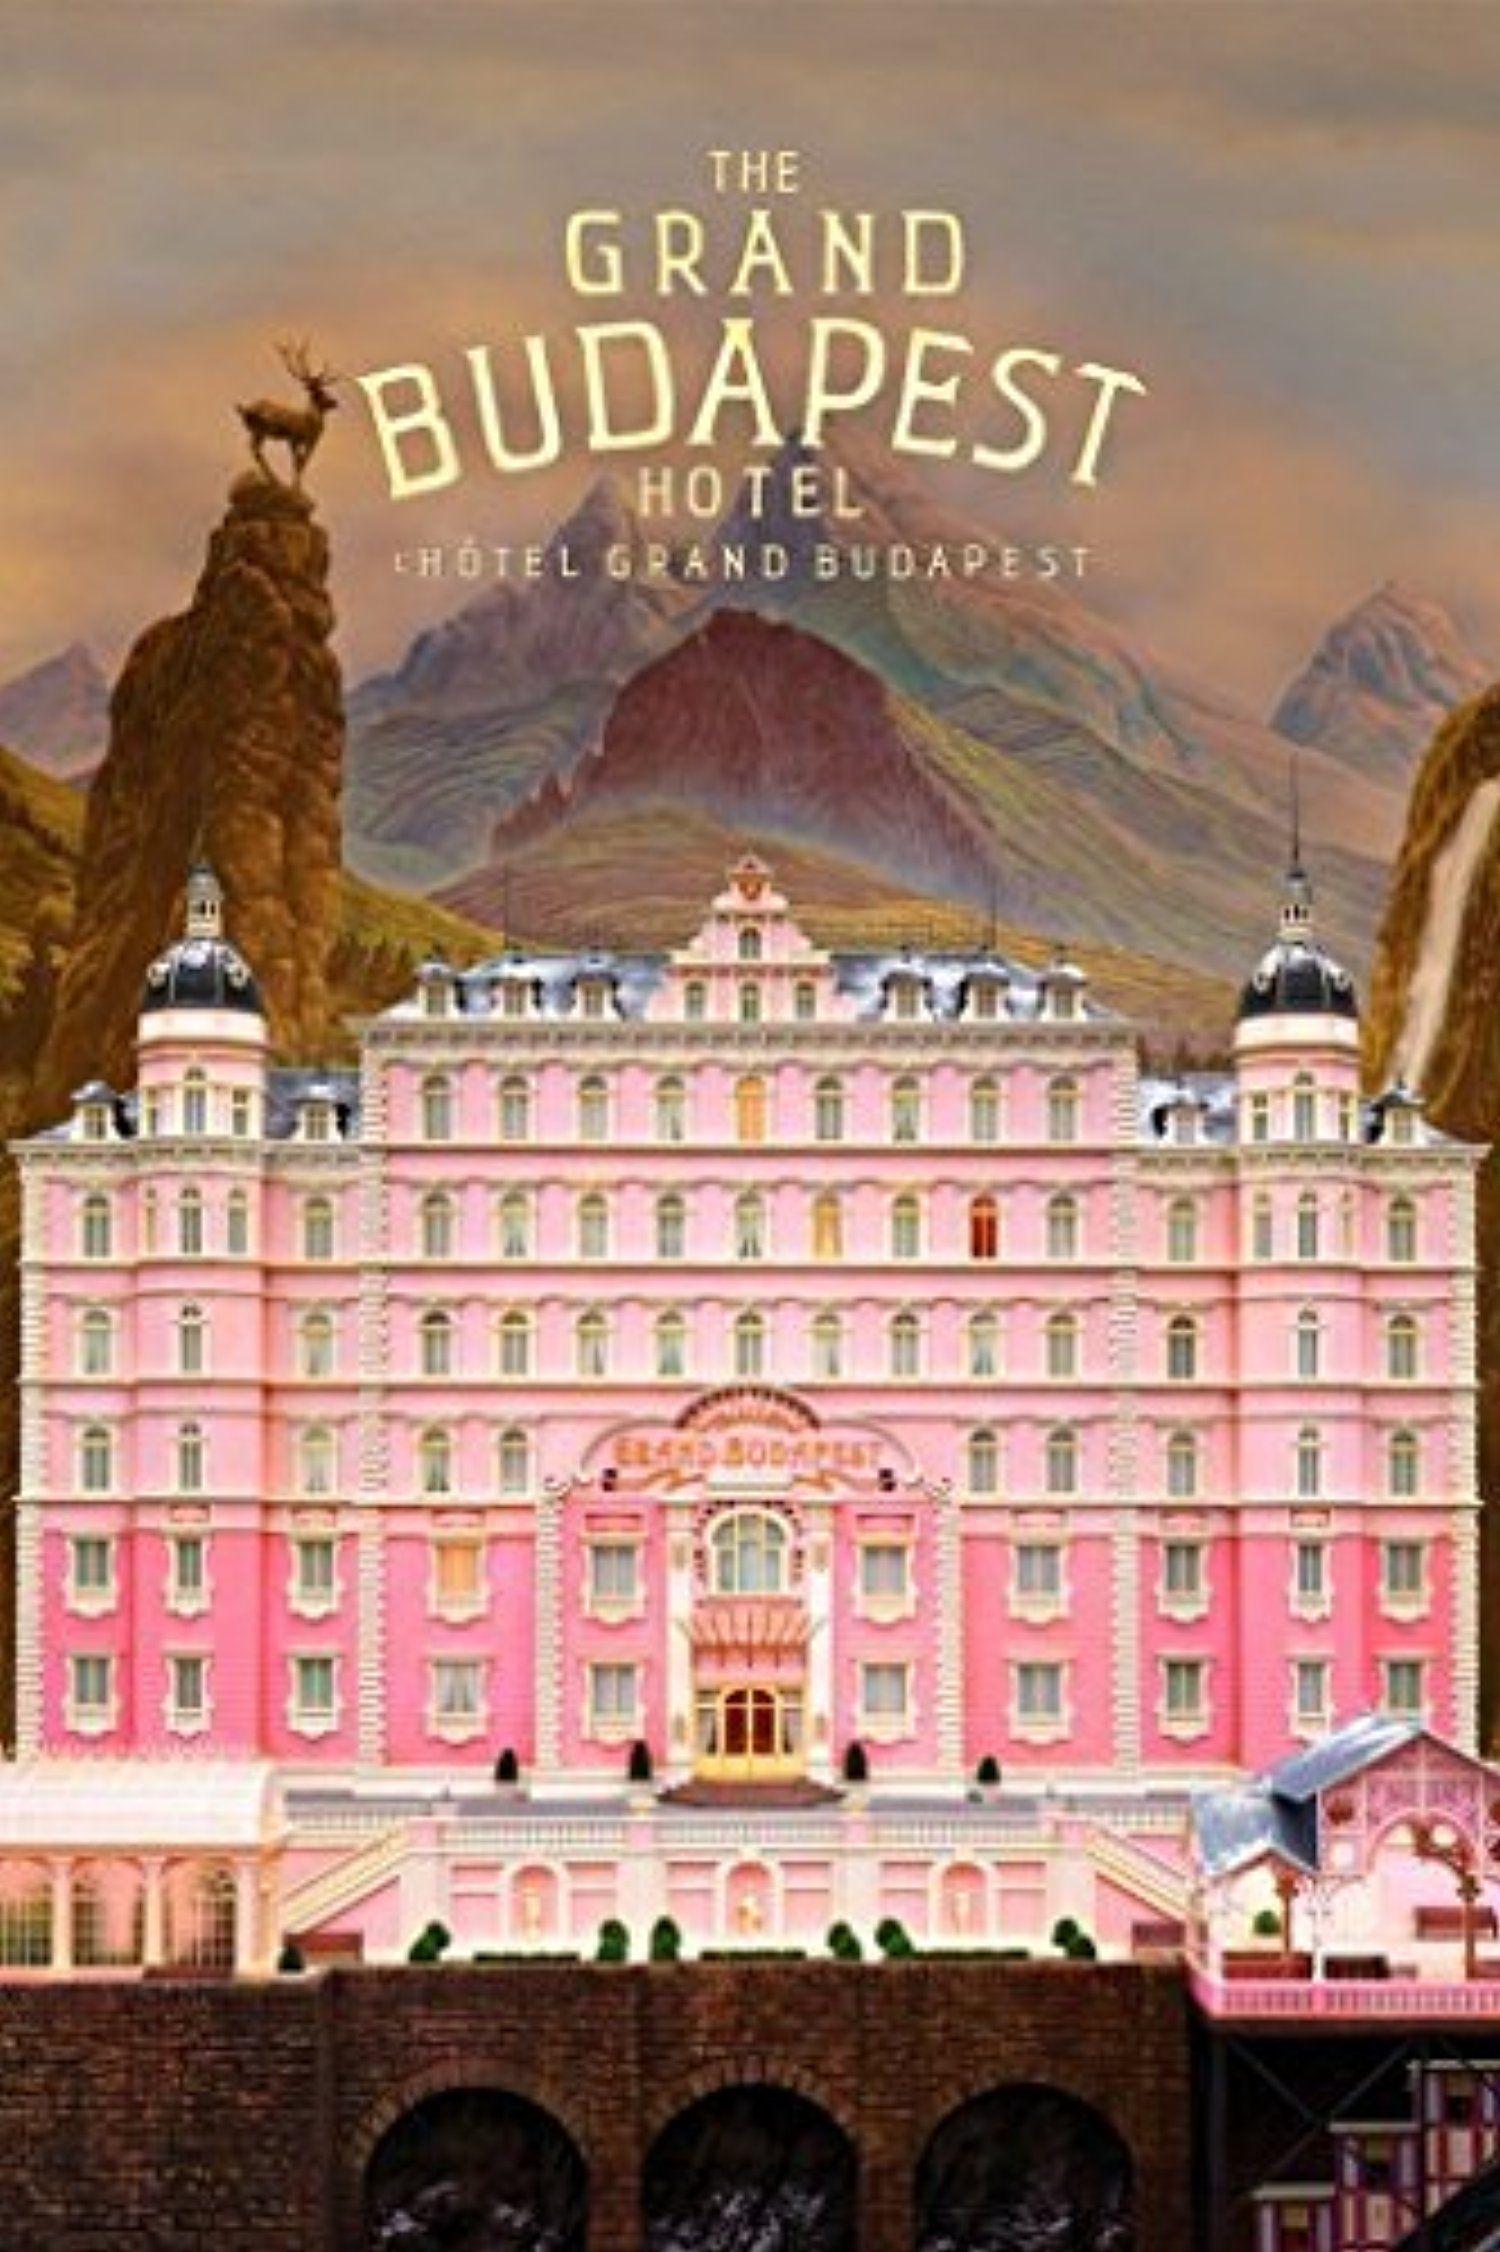 Decal Jewelry The Grand Budapest Hotel inch Silk Poster Aka